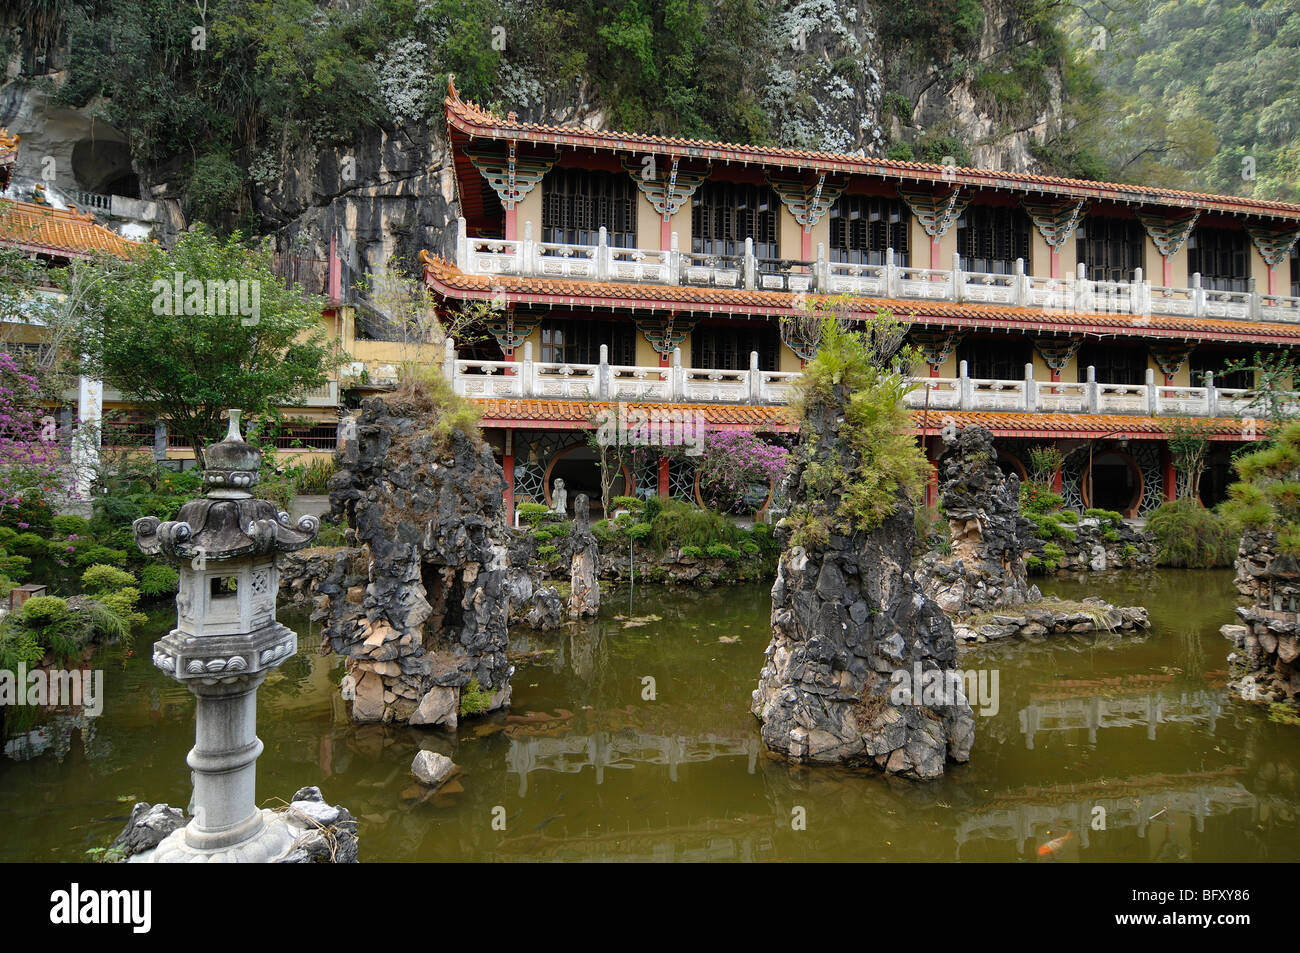 Sam Poh Tong Chinese Temple (1950), alias Three Buddhas Cave, Chinese Tao ou Taoïste Cave Temple et Chinese Rock Gardens avec Fish Ponds, Ipoh, Malaisie Banque D'Images